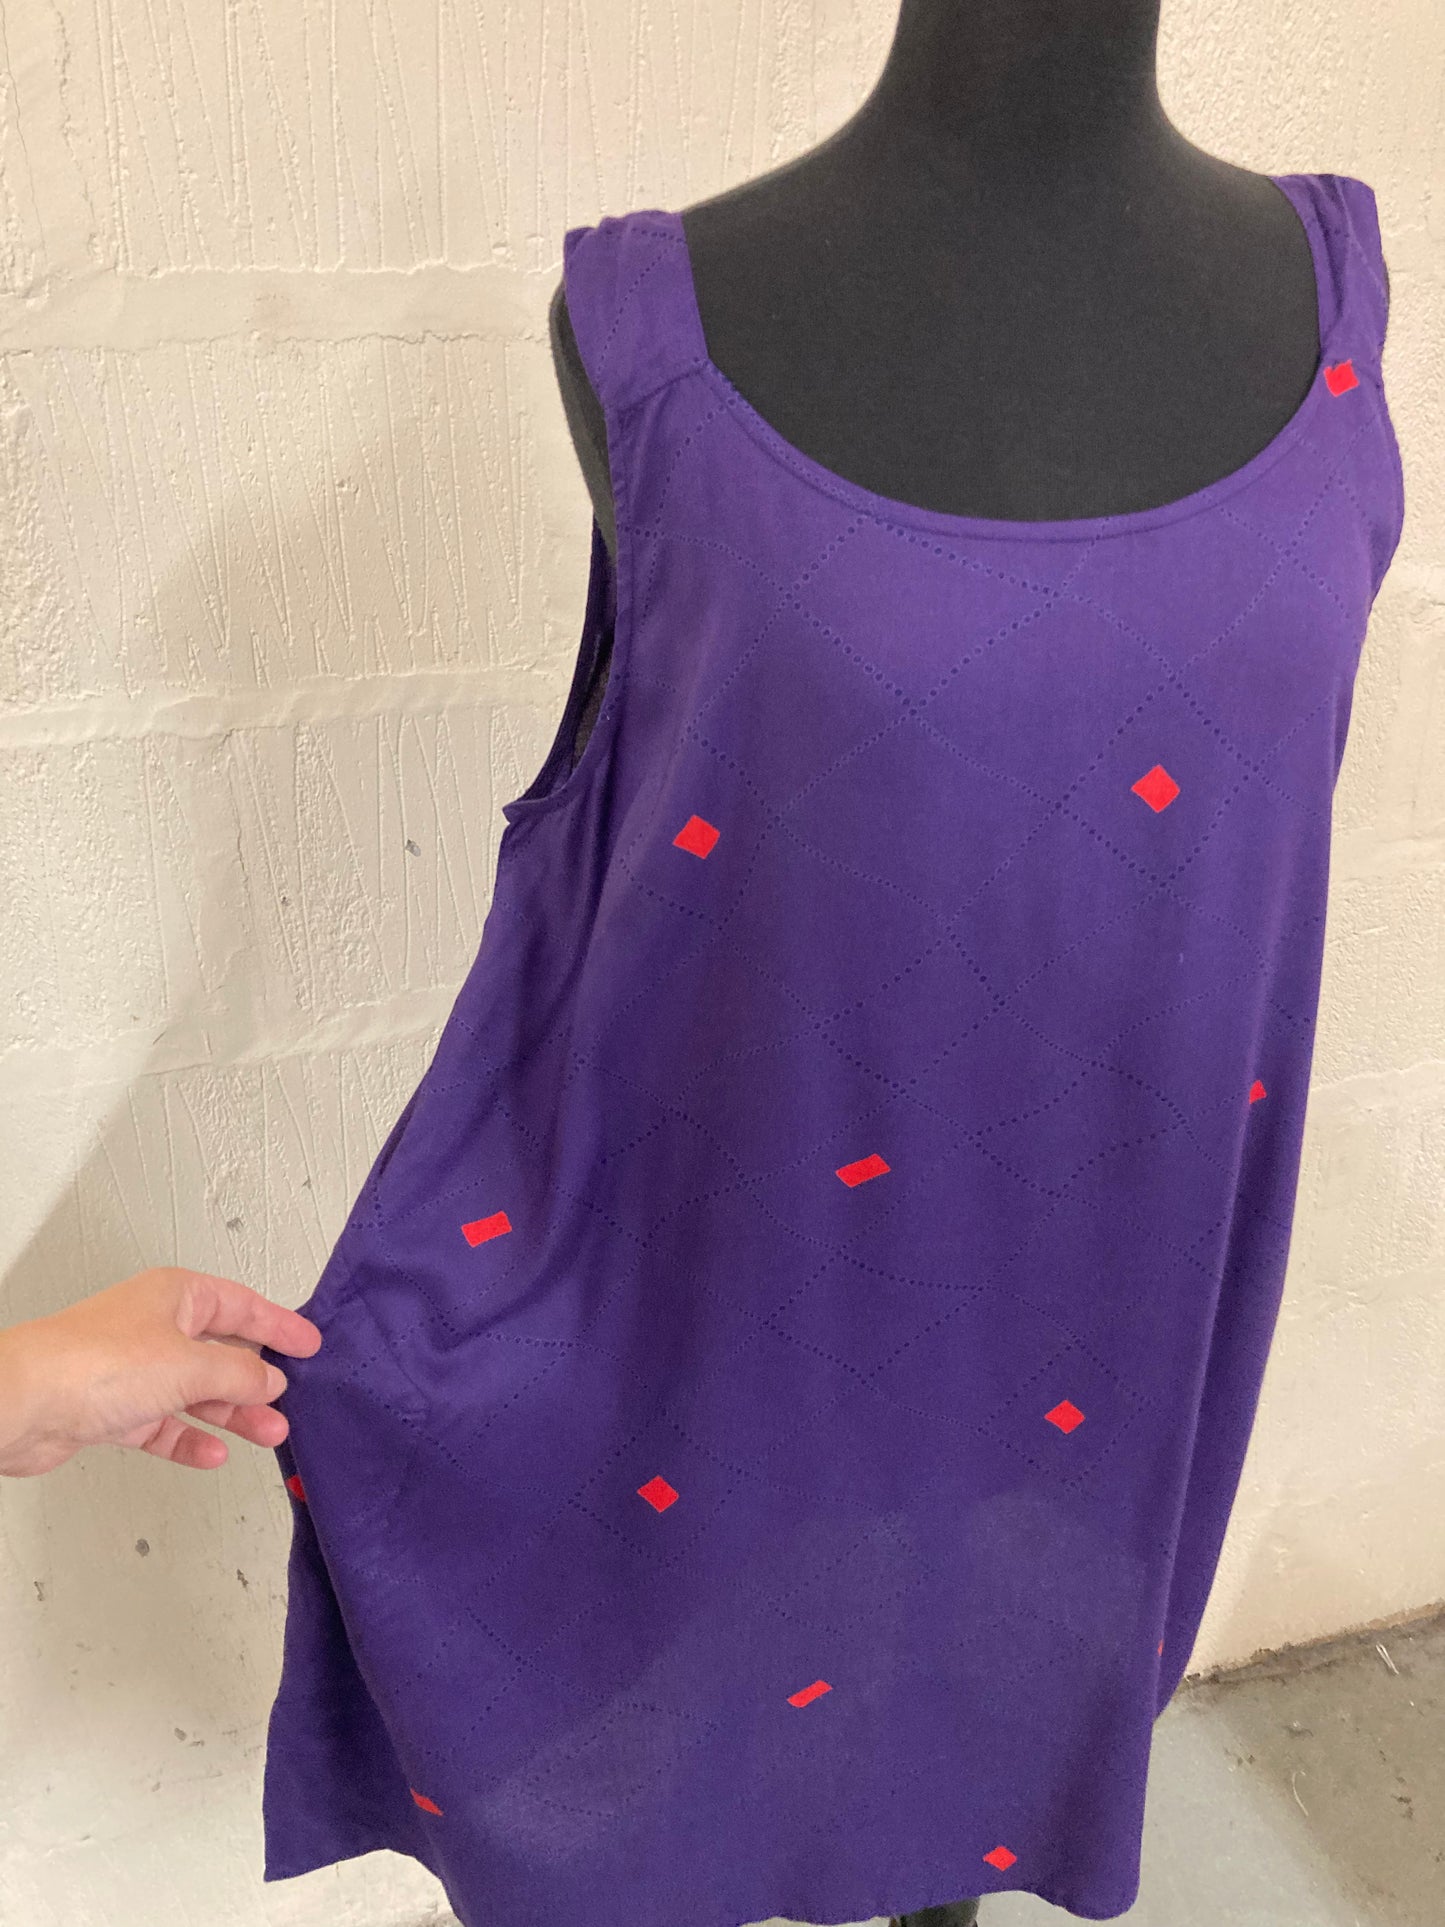 1960s Style BNWT Purple and Red Sleeveless A Line Shift Dress Size 18